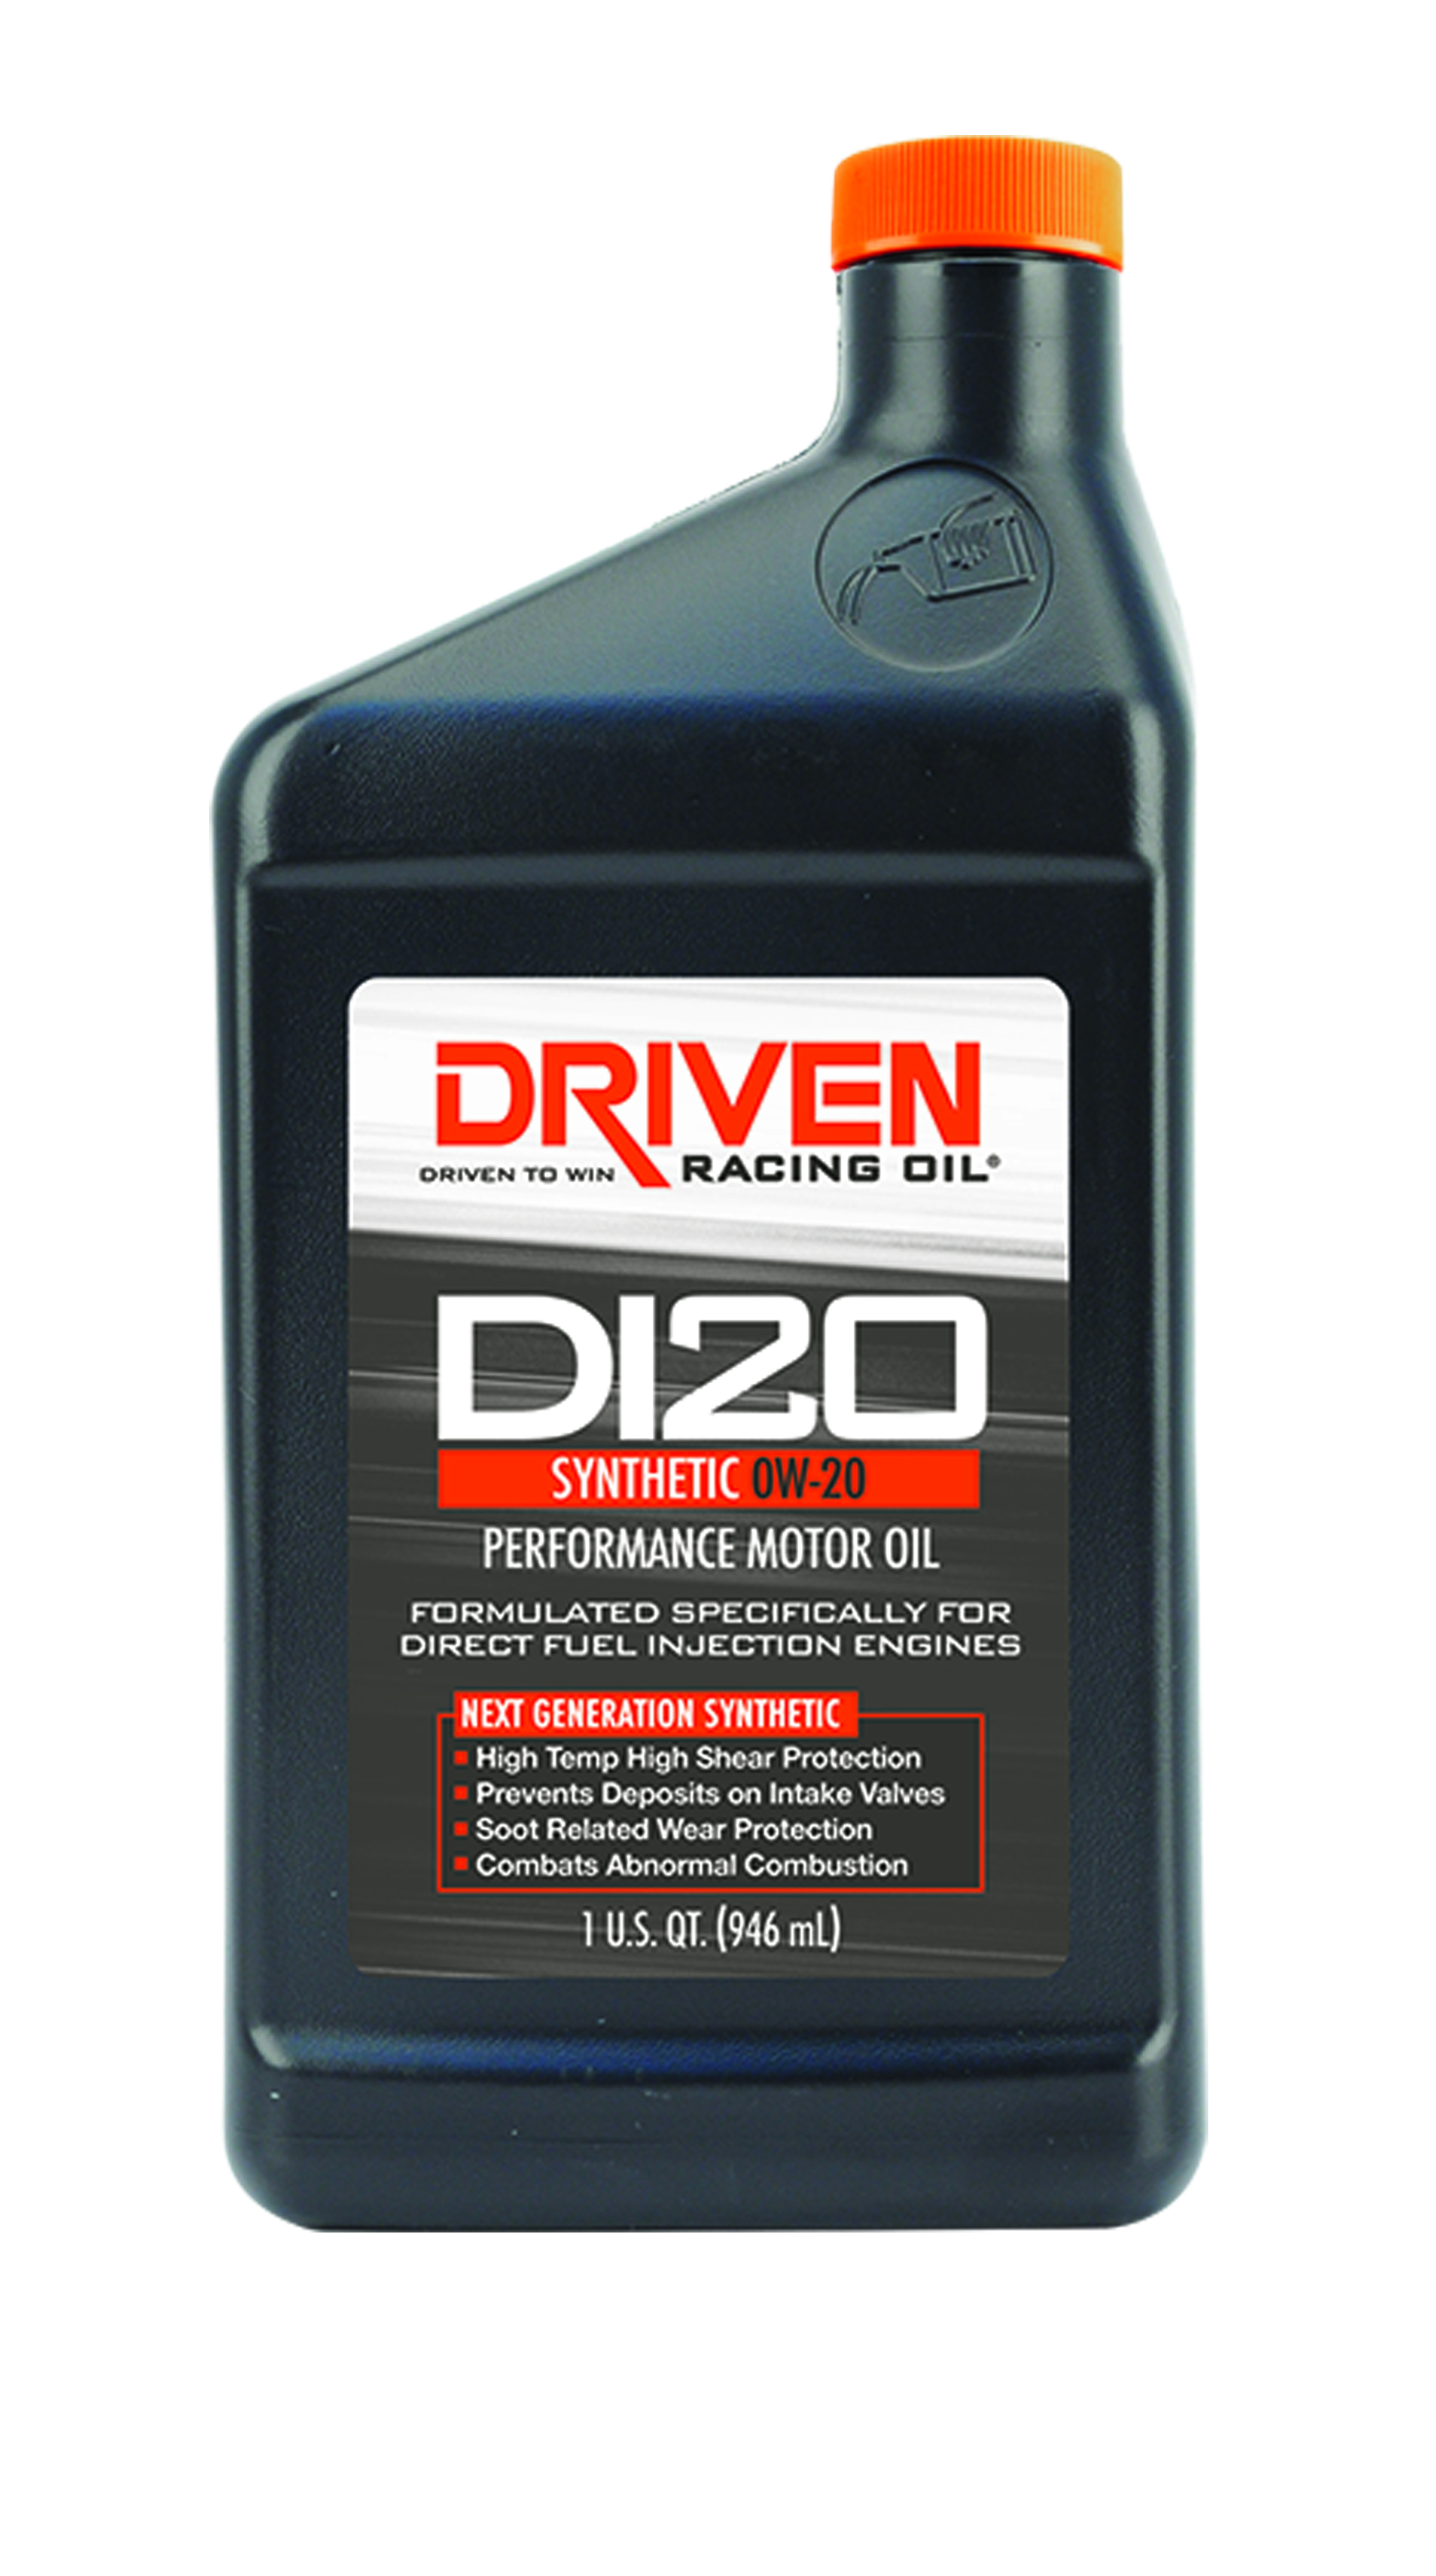 Driven Oil DI20 0W-20 Synthetic Direct Injection Engine Oil - 1 Quart Bottle JGP18206